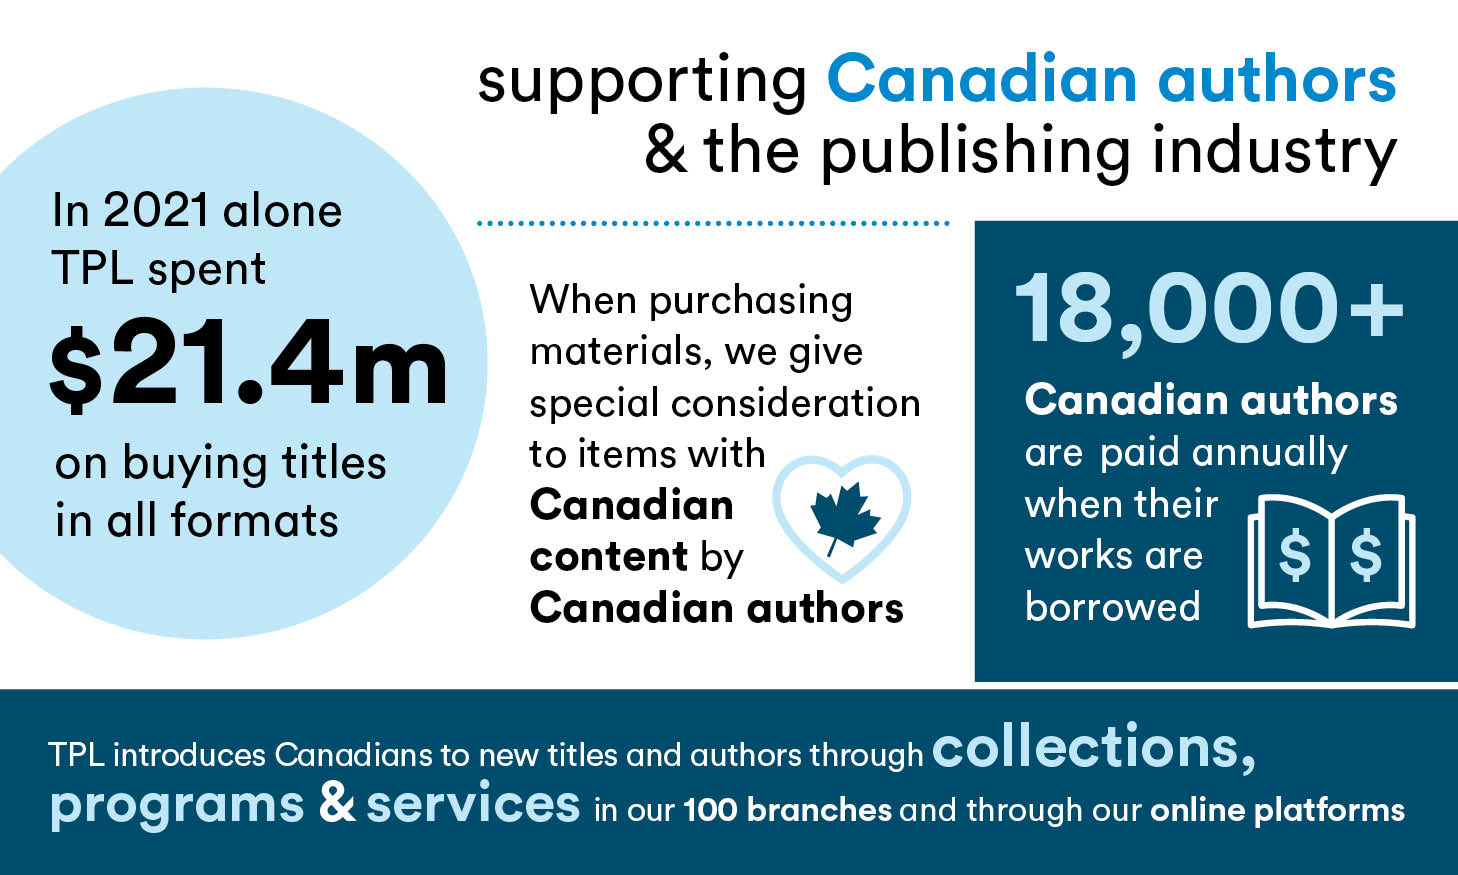 Infographic explaining how TPL supports Canadian authors & the publishing industry showing four facts demonstrating our support: In 2021 alone TPL spent $21.4m on buying titles in all formats, highlighted in a blue circle; when purchasing materials, we give special consideration to items with Canadian content by Canadian authors, showing a heart with a maple leaf inside it; 18,000+ Canadian authors are paid annually when their books are borrowed, showing a book with open pages depicting dollar signs; TPL introduces Canadians to new titles and authors through collections, programs & services in our 100 branches and through our online platforms.